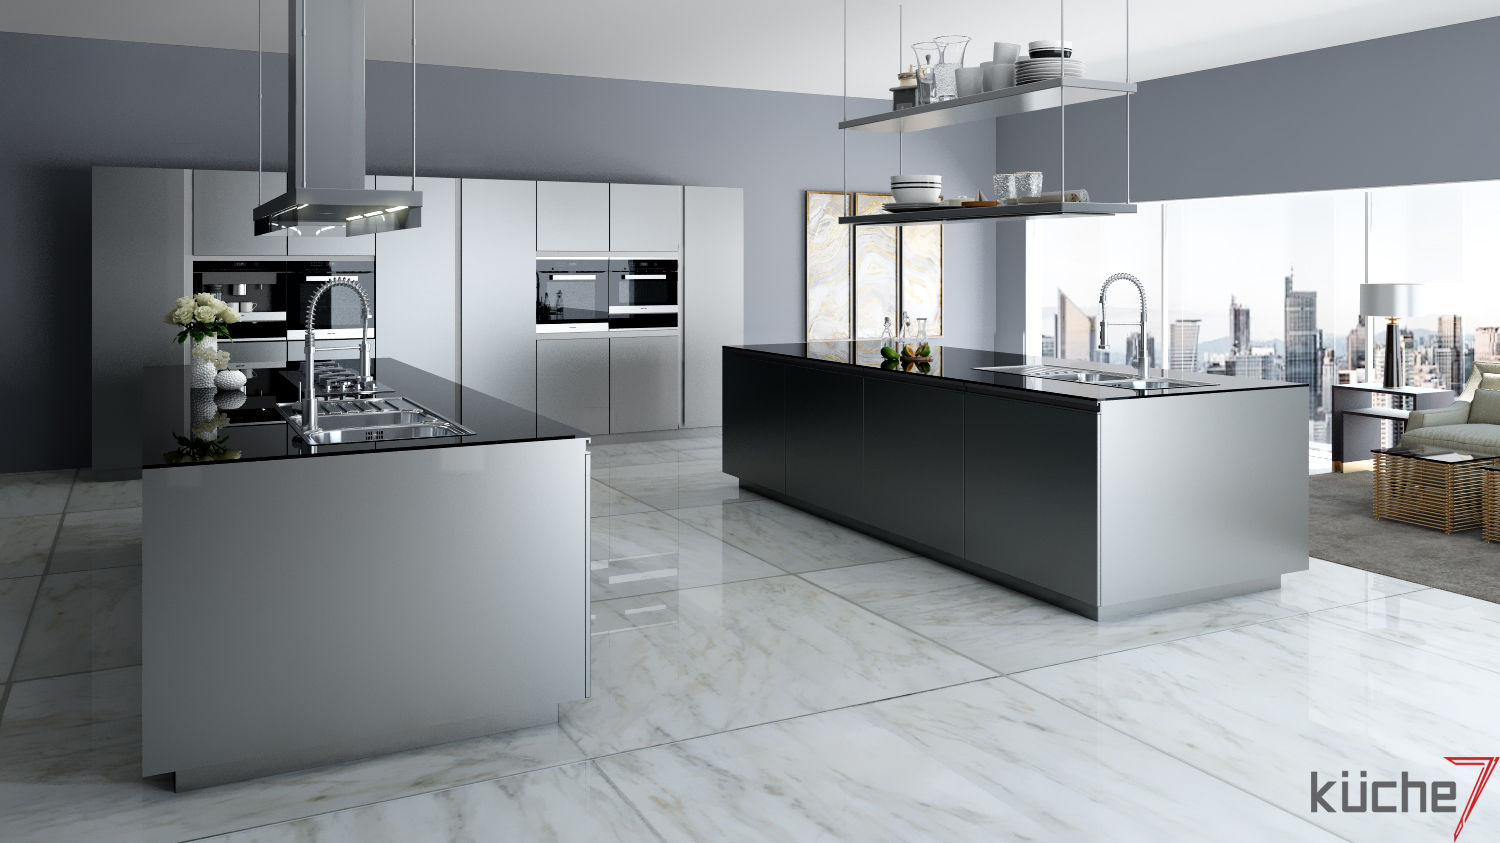 Luxury kitchens that outclasses all other kitchens you've seen, Küche7 Küche7 모던스타일 주방 철 / 철강